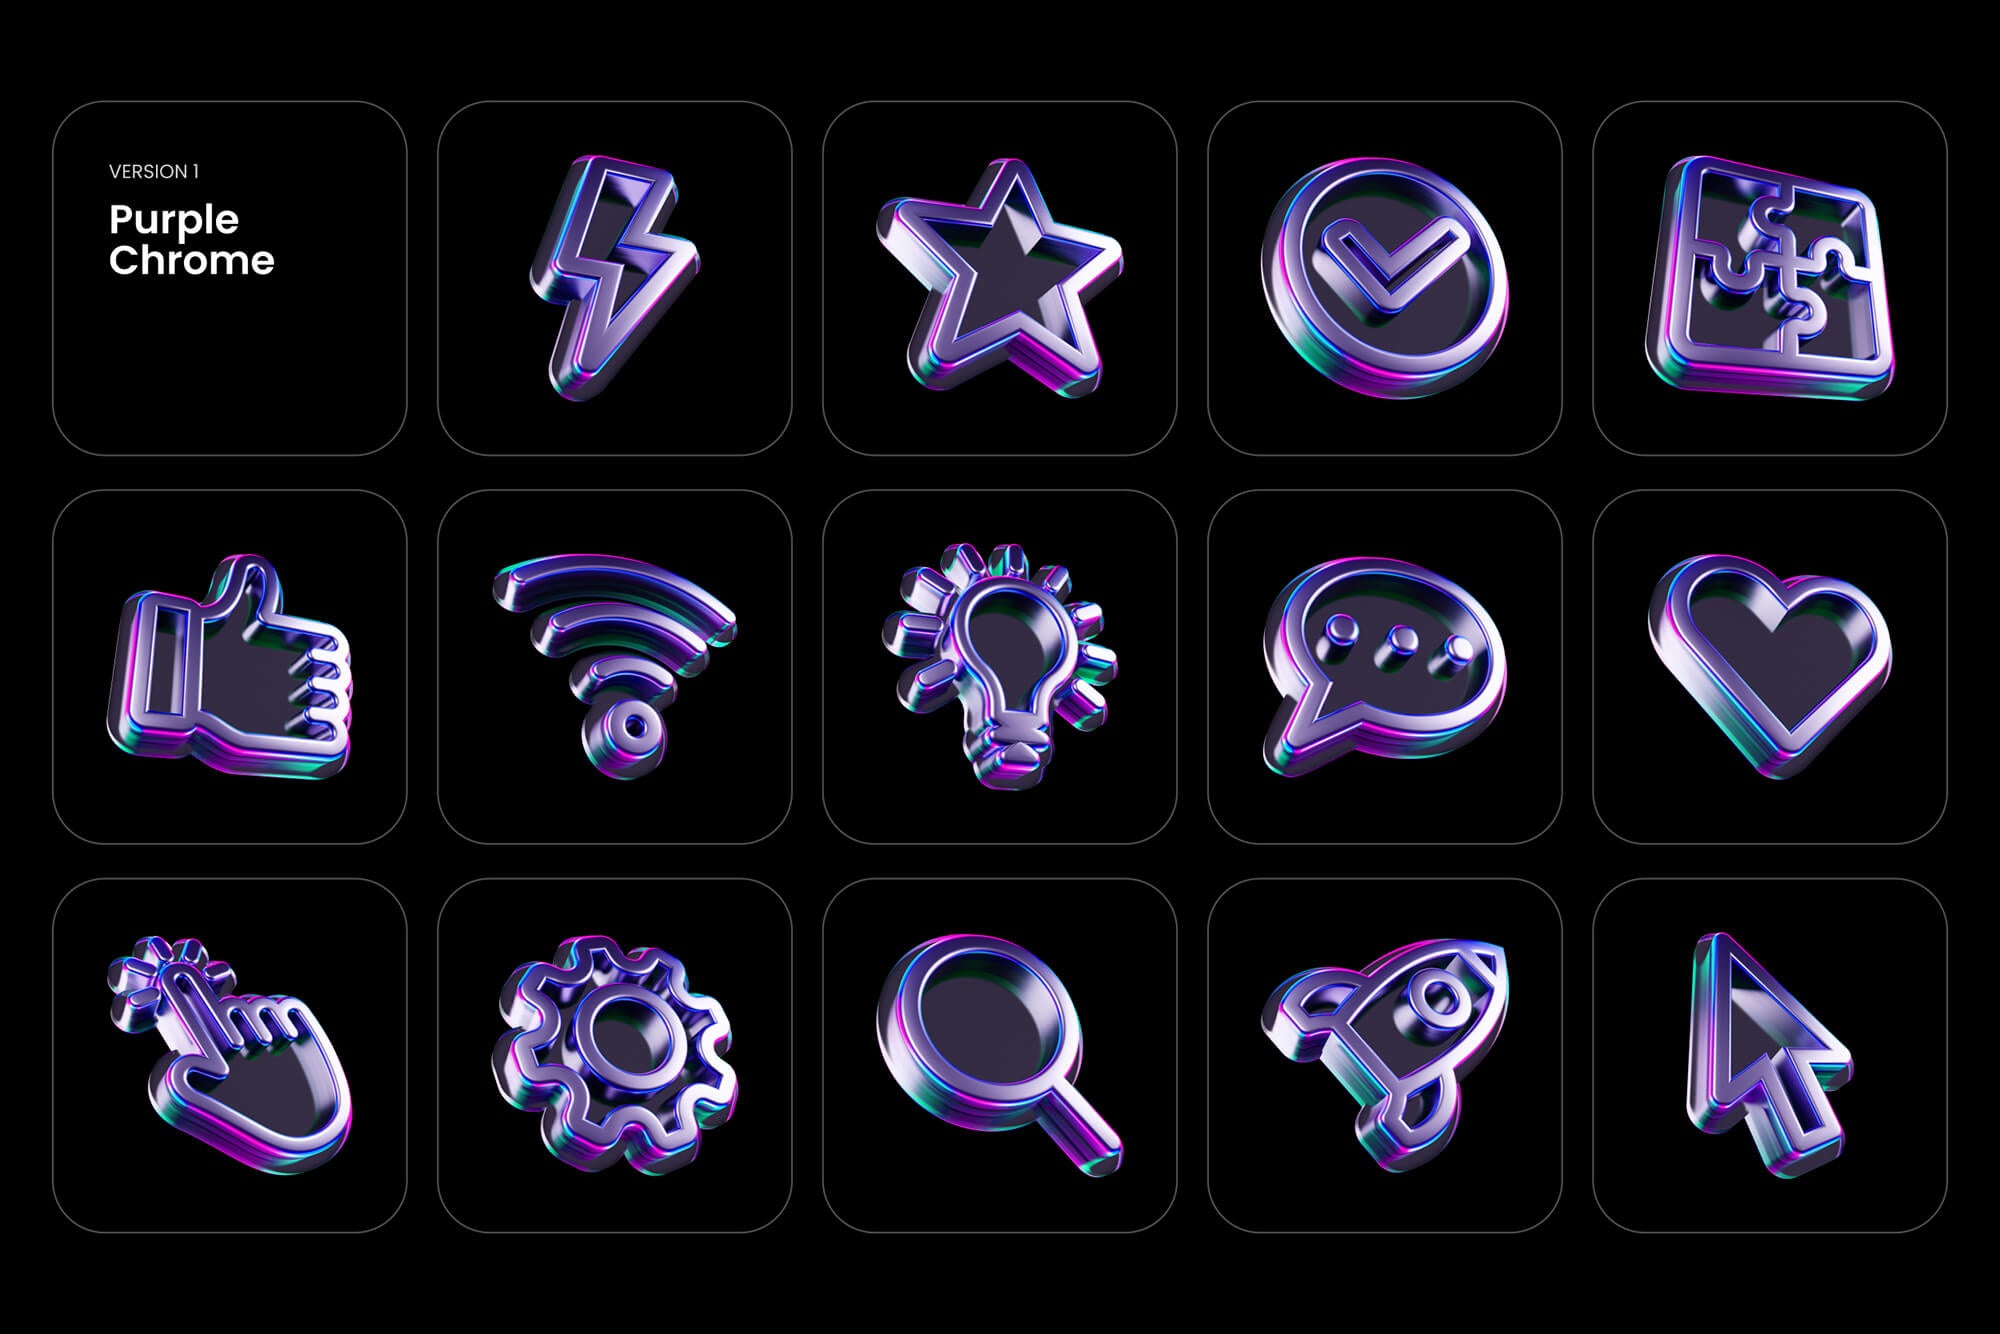 3D Glossy Icons